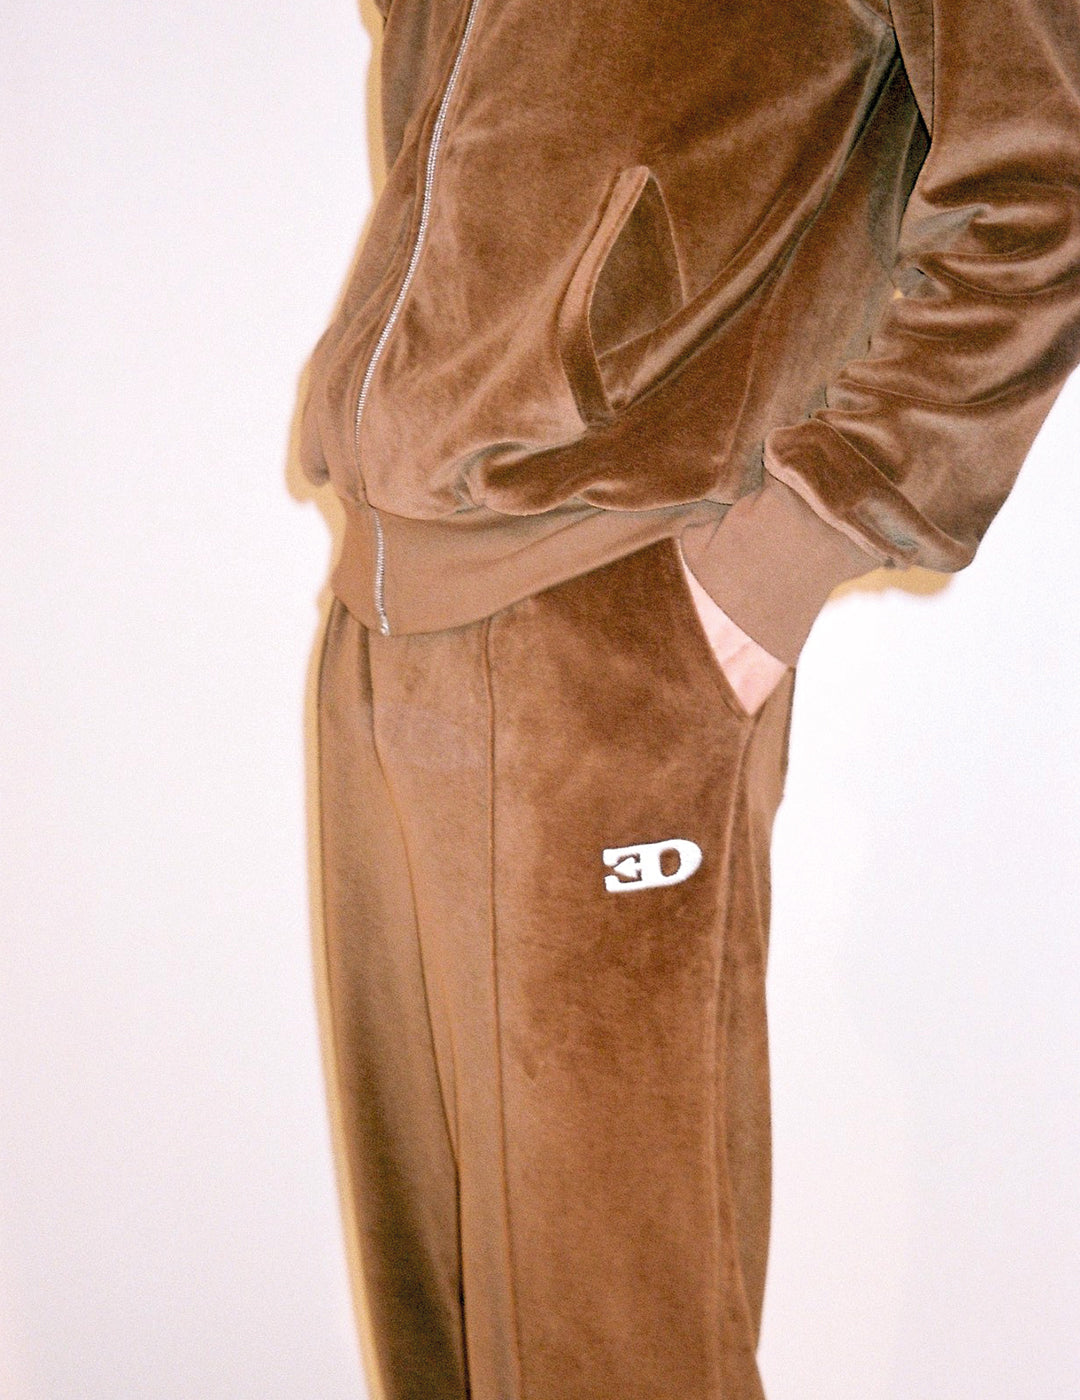 THE VELOUR TRACK PANTS IN TOBACCO